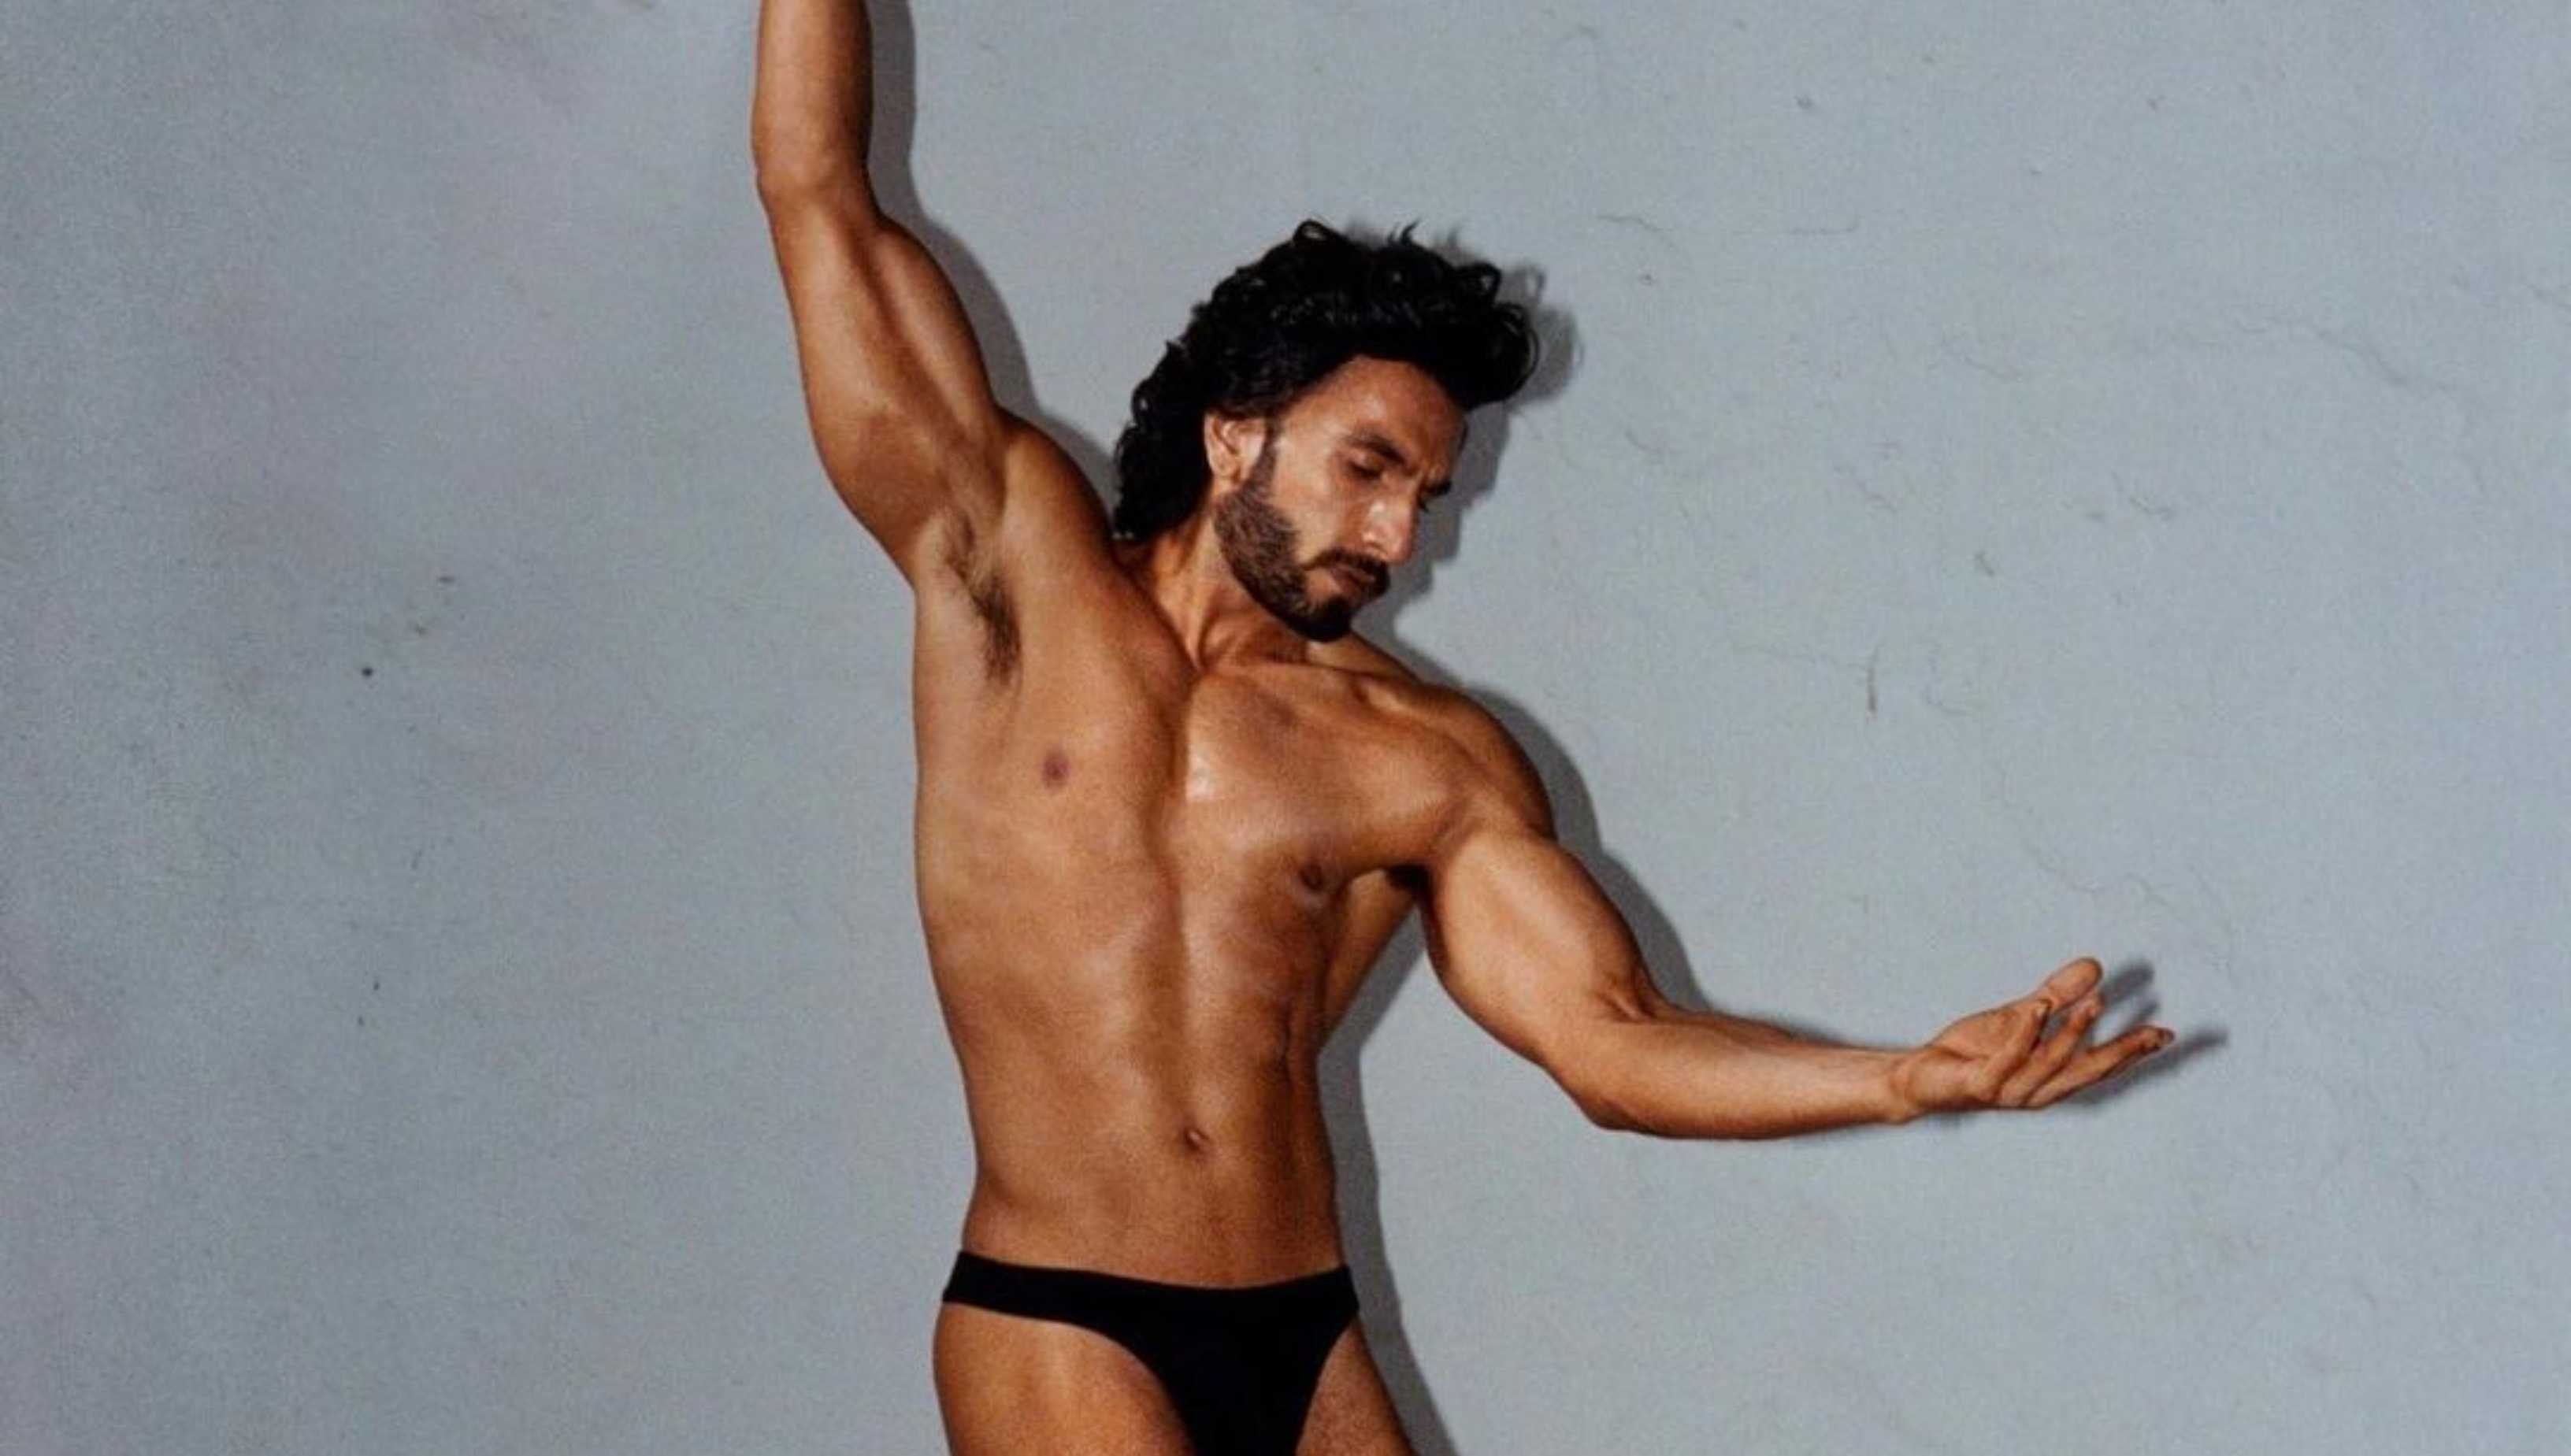 Ranveer Singh says he did not upload nude photos in his statement to police; here’s what we know